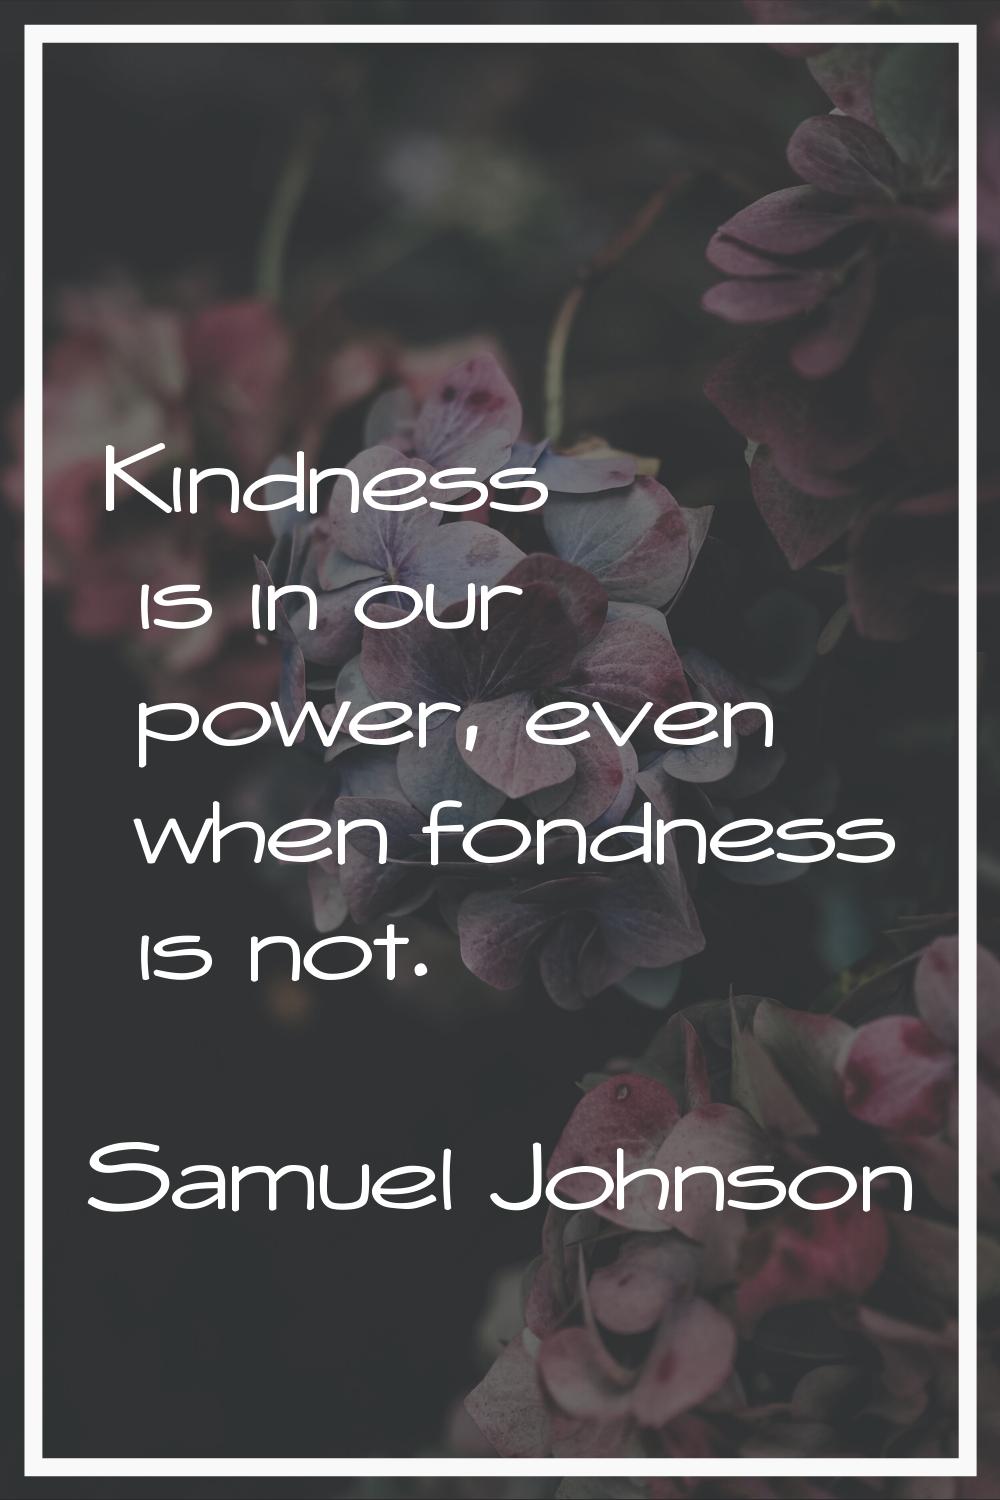 Kindness is in our power, even when fondness is not.